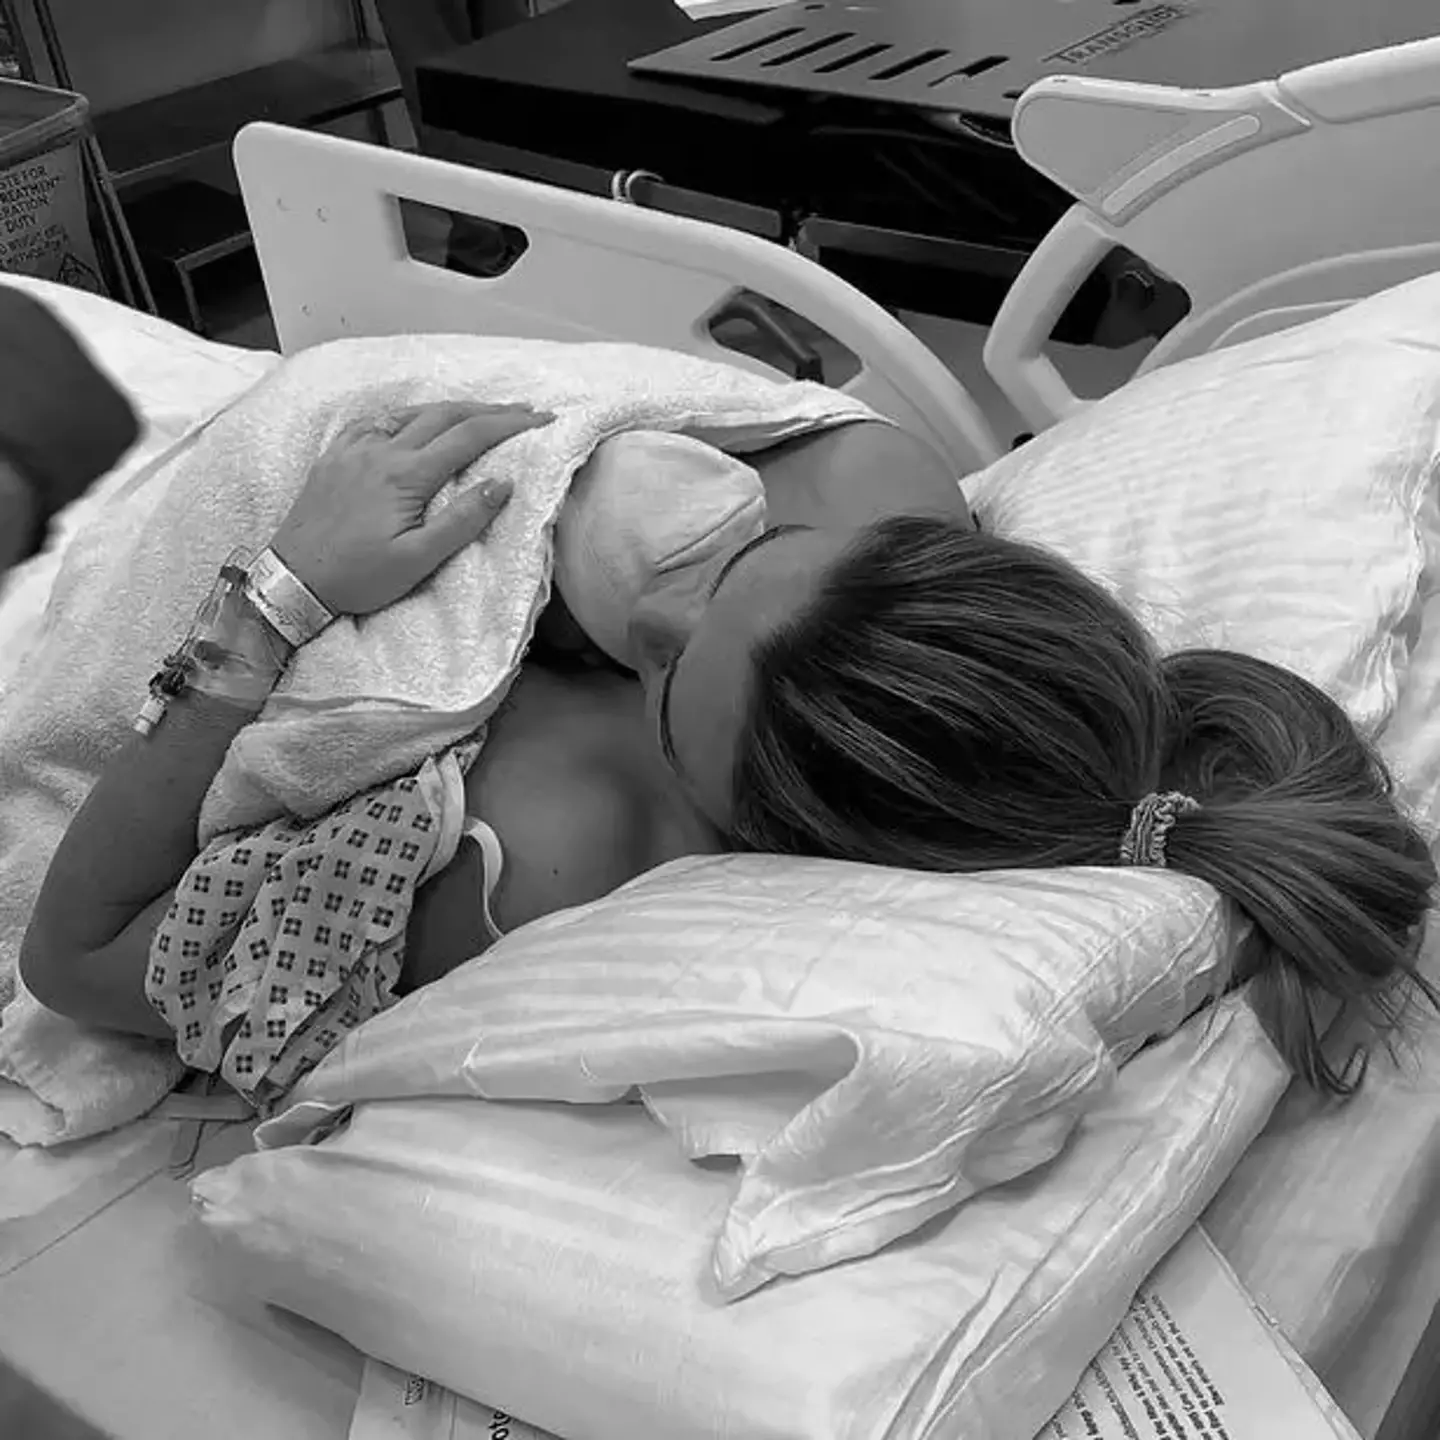 Emily and newborn daughter sharing a moment together in hospital.